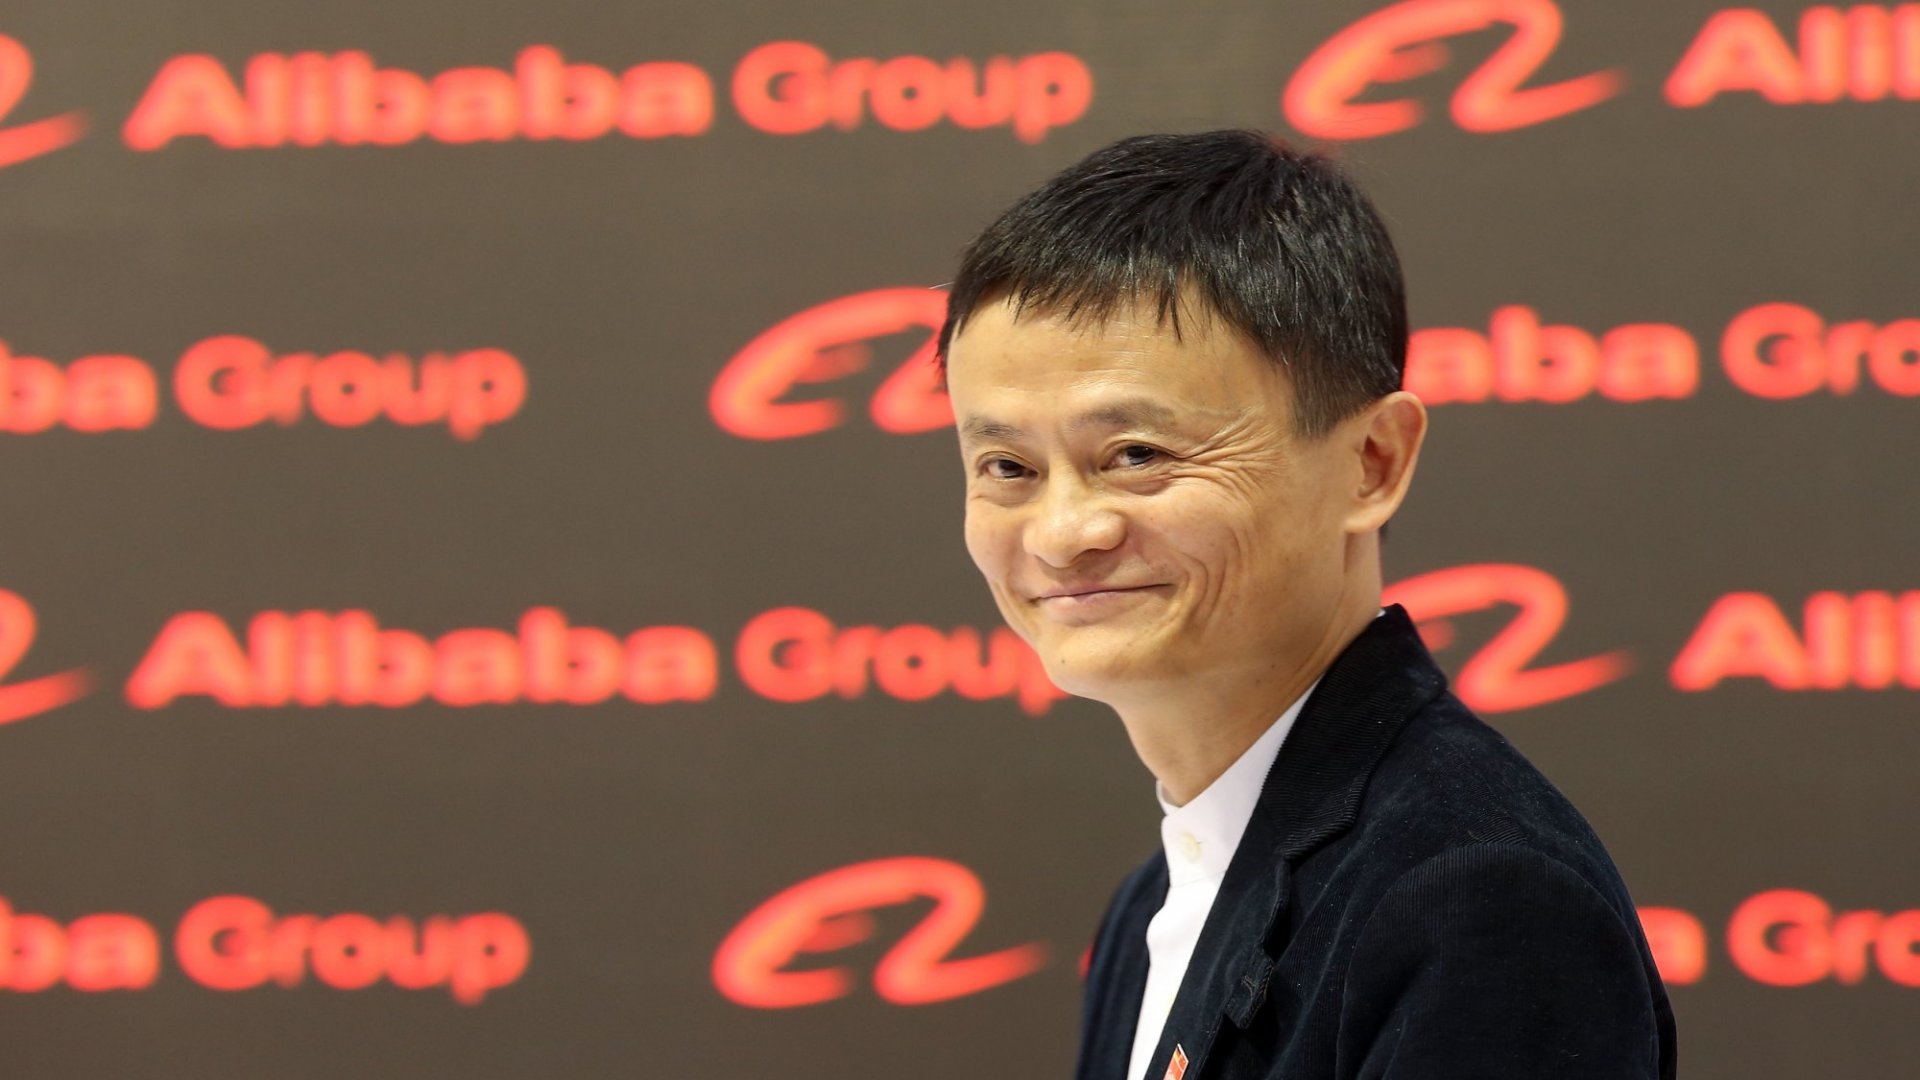 Jack Ma’s Net Worth: Owner of Alibaba